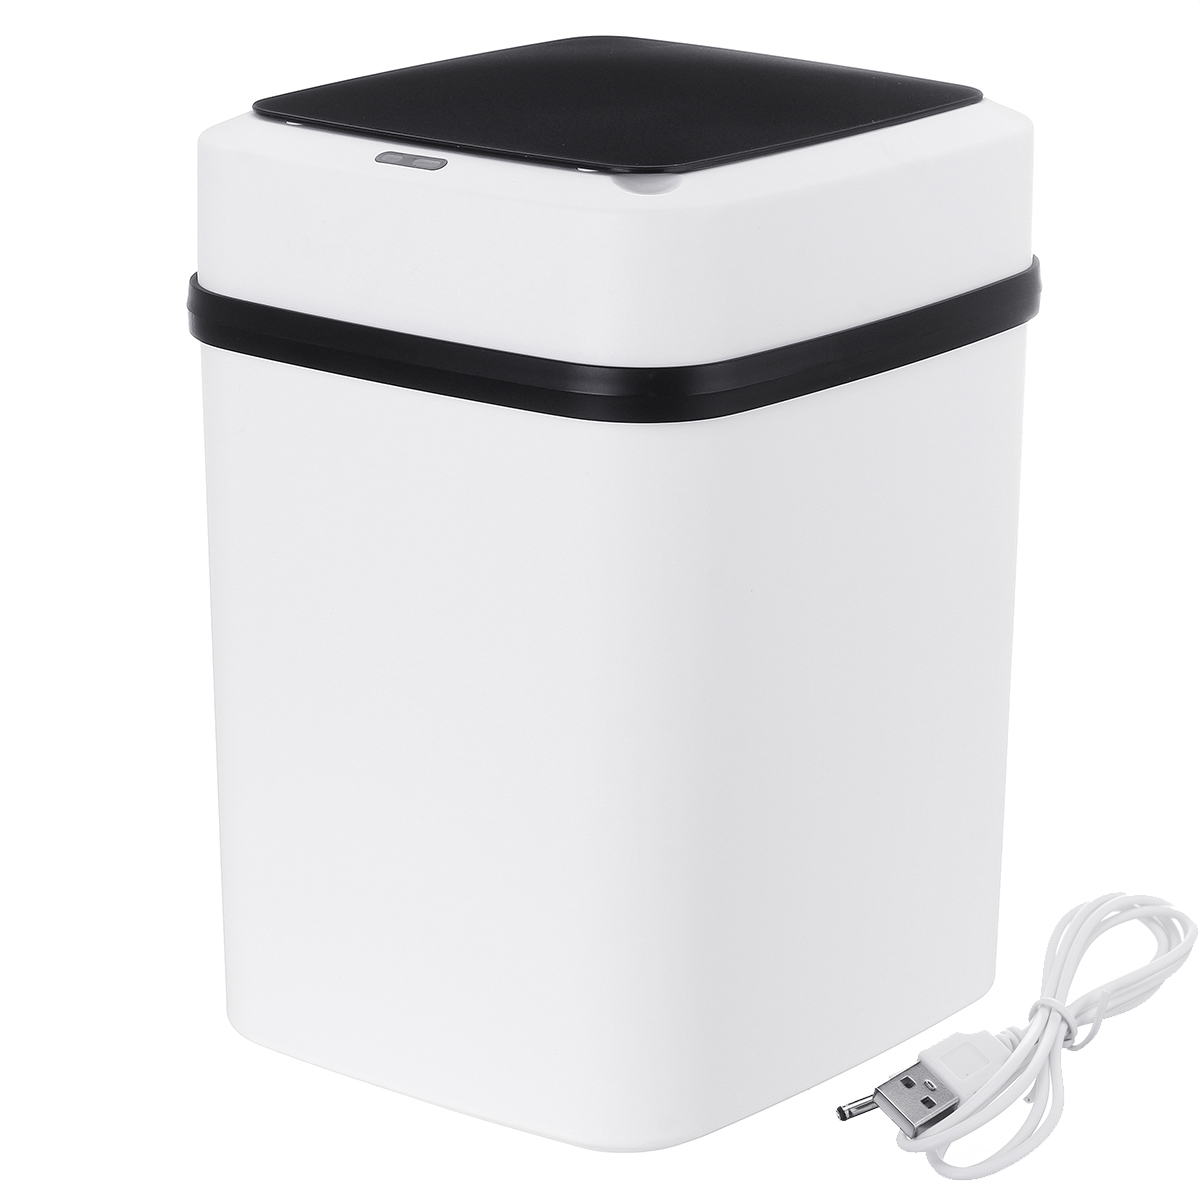 Full-Automatic-Sensor-Rechargeable-Waste-Bins-Household-Smart-Trash-Can-1613282-5